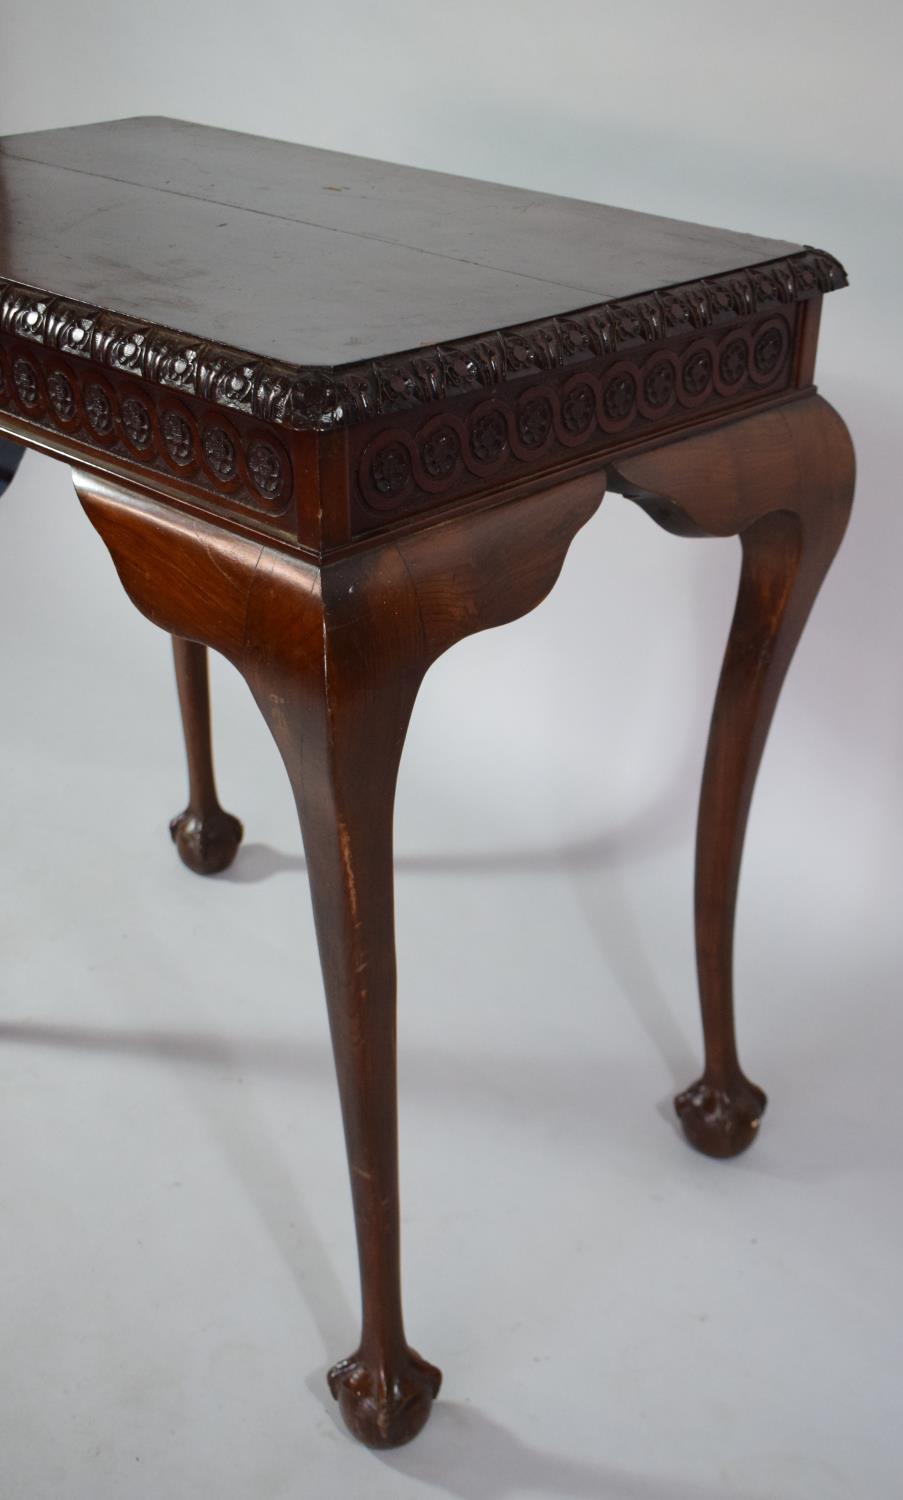 A Mahogany Silver Table with Carved Border set on Cabriole Legs culminating in Claw and Ball Feet, - Image 5 of 6